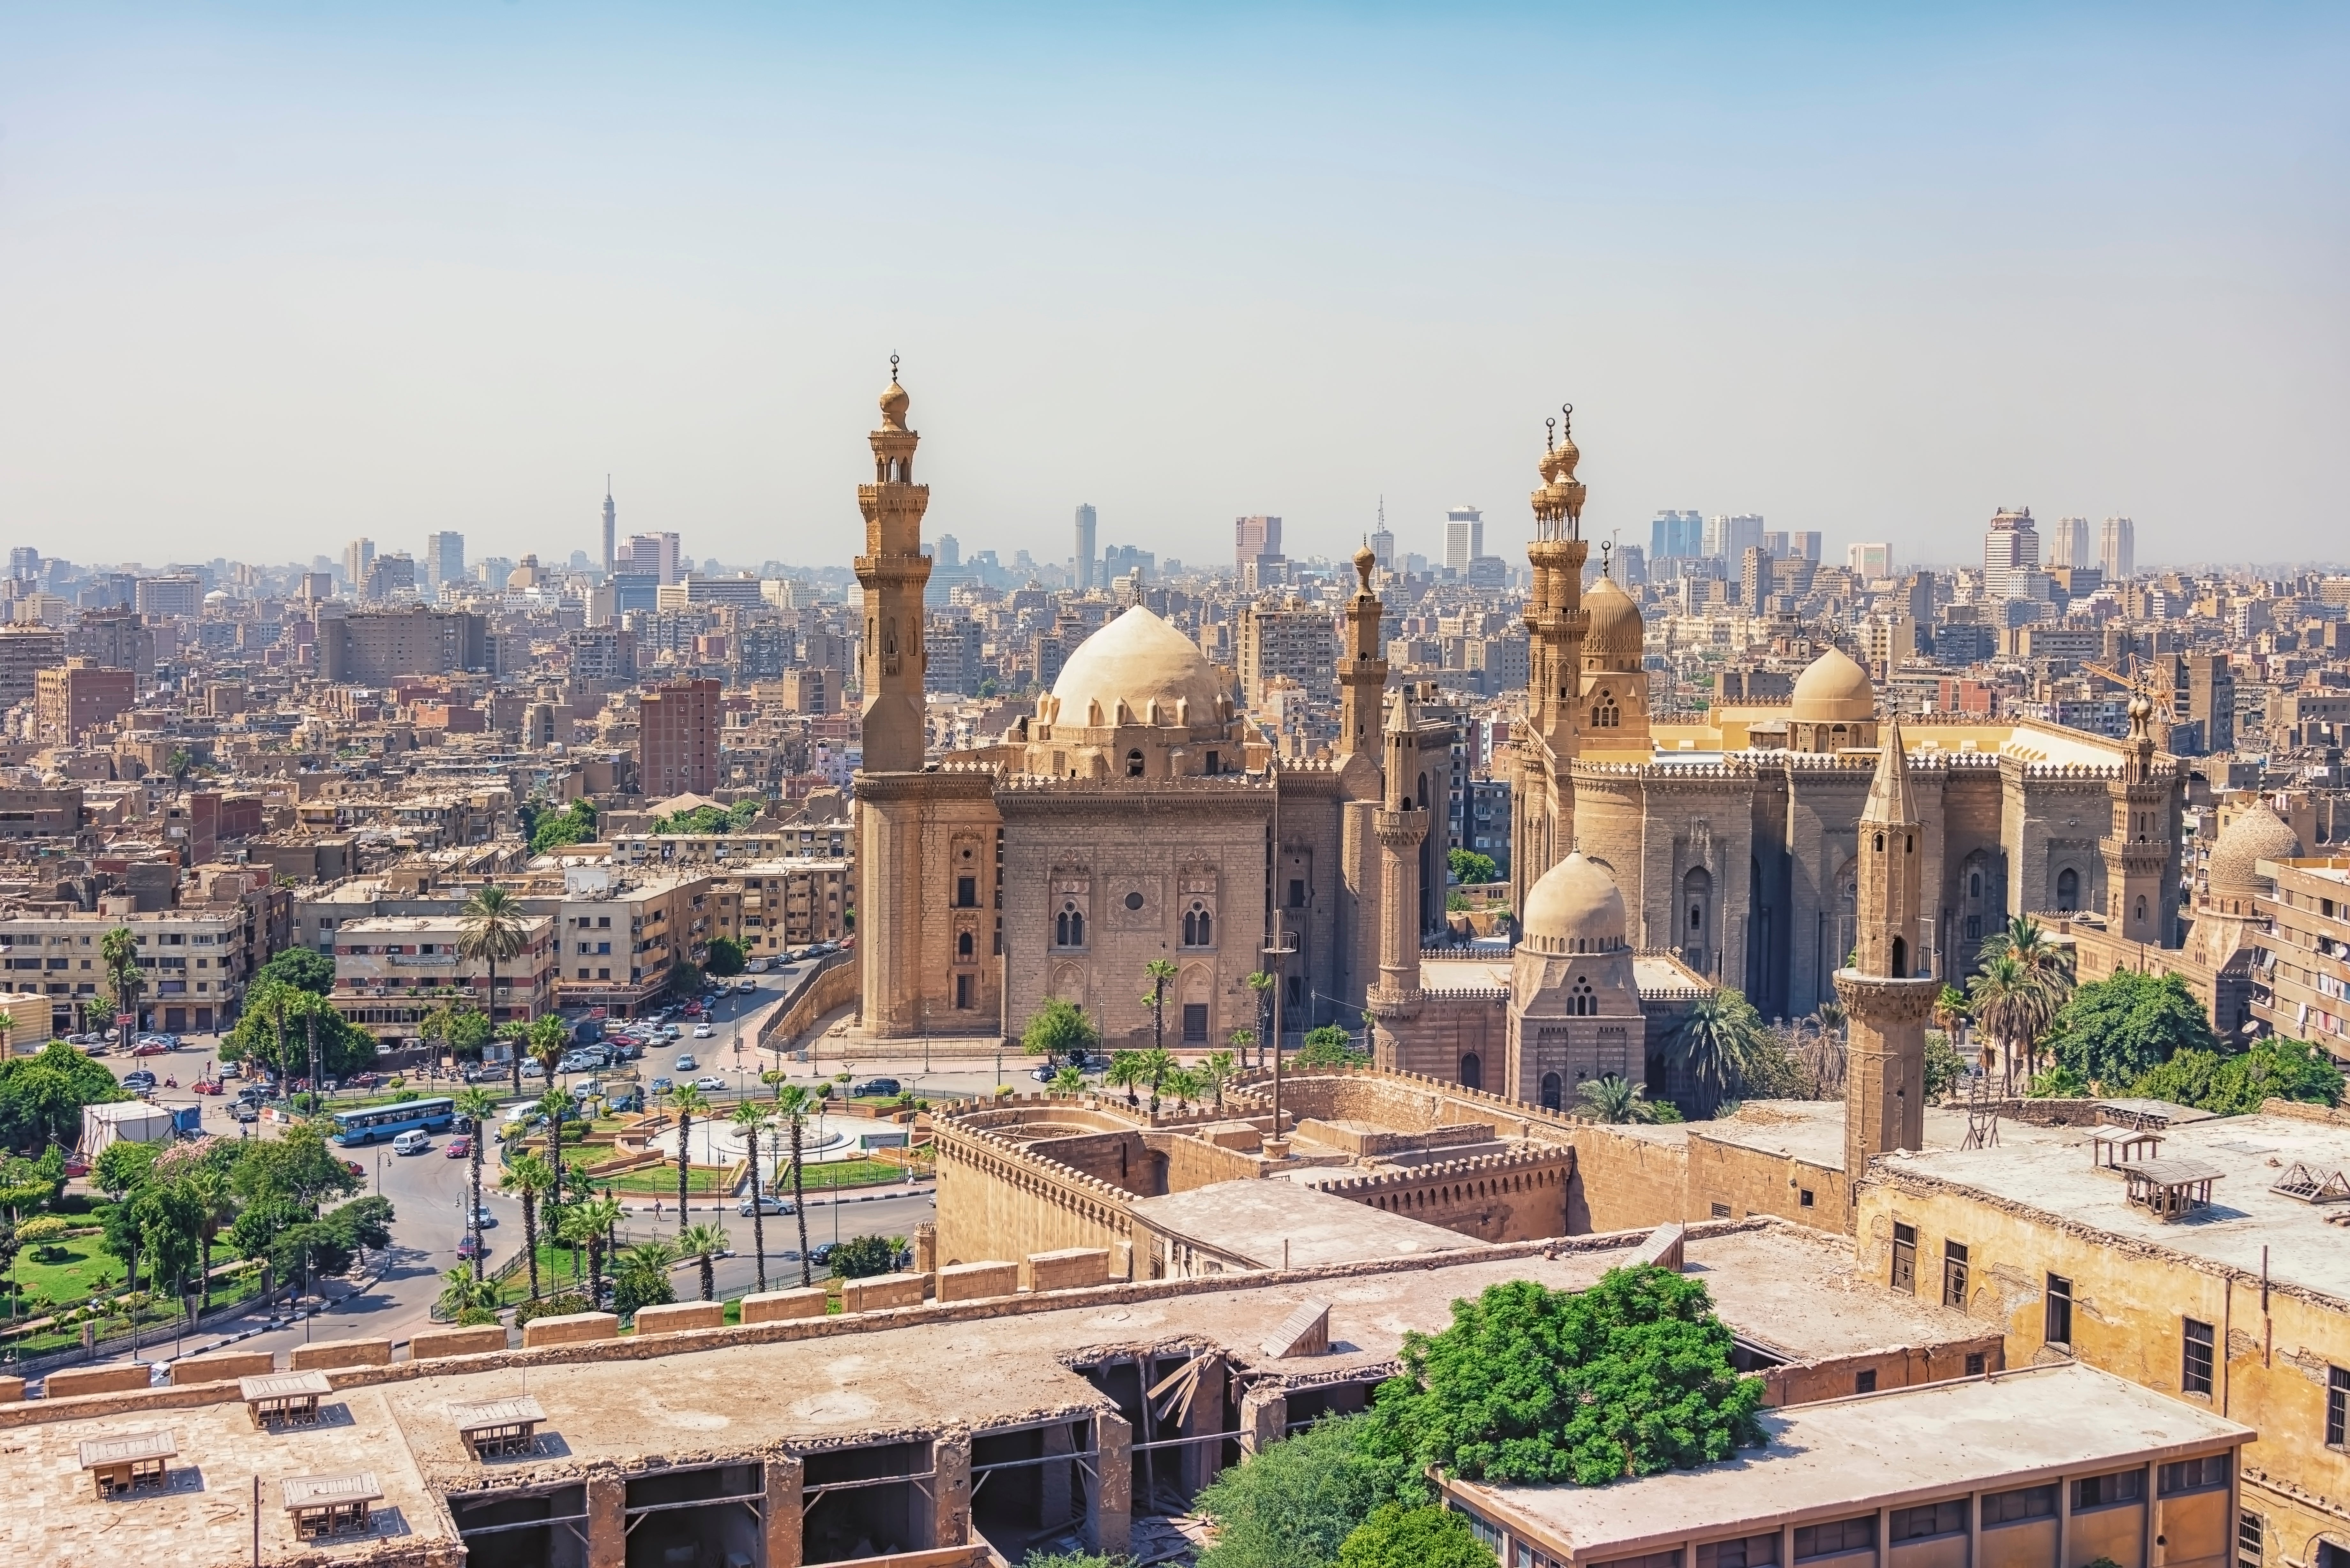 Travel beyond the pyramids in Cairo, Egypt